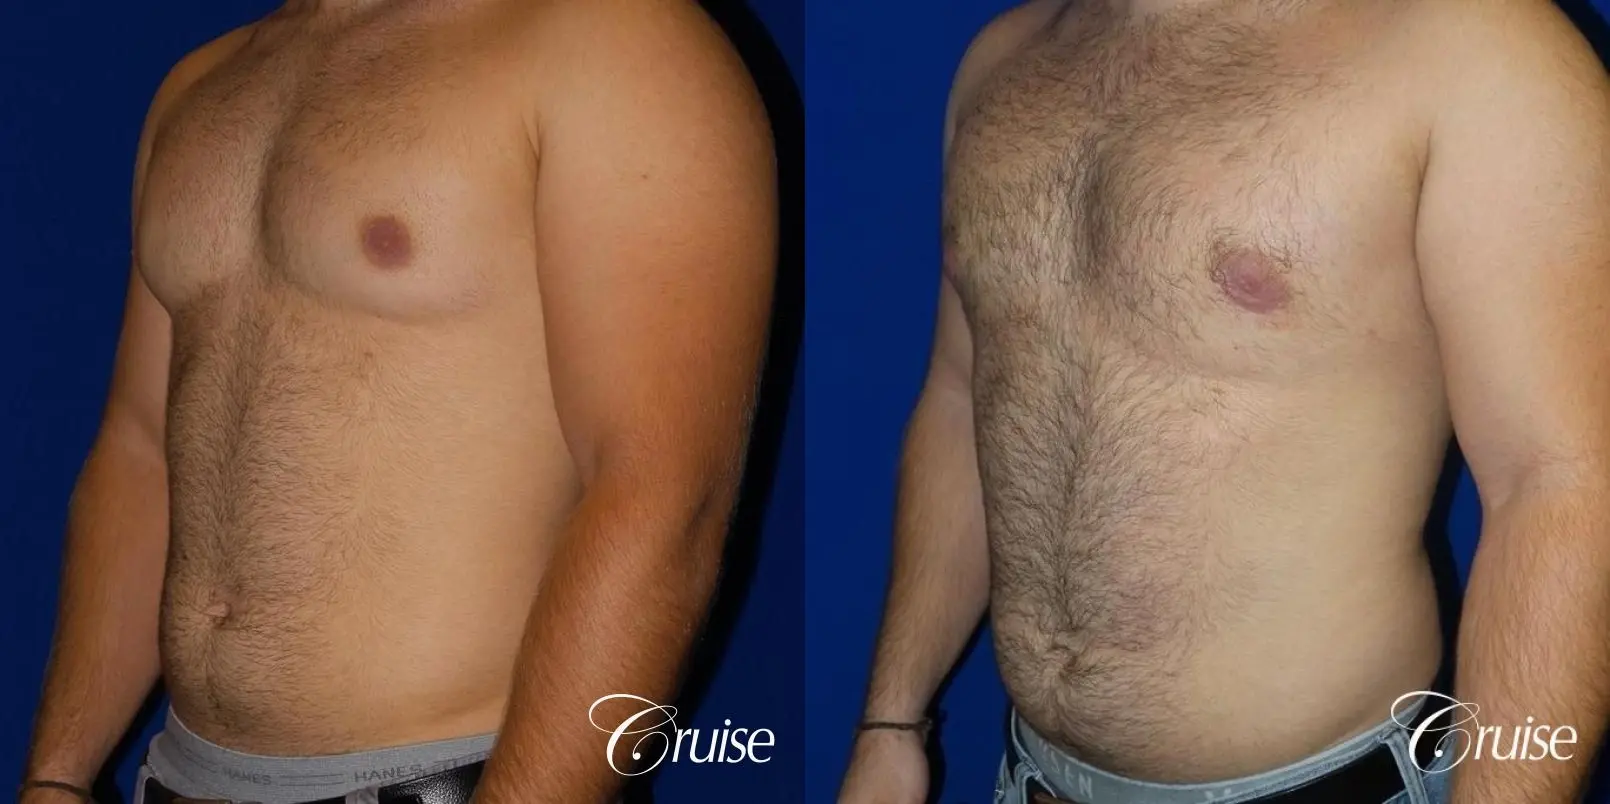 best gynecomastia results - Before and After 2